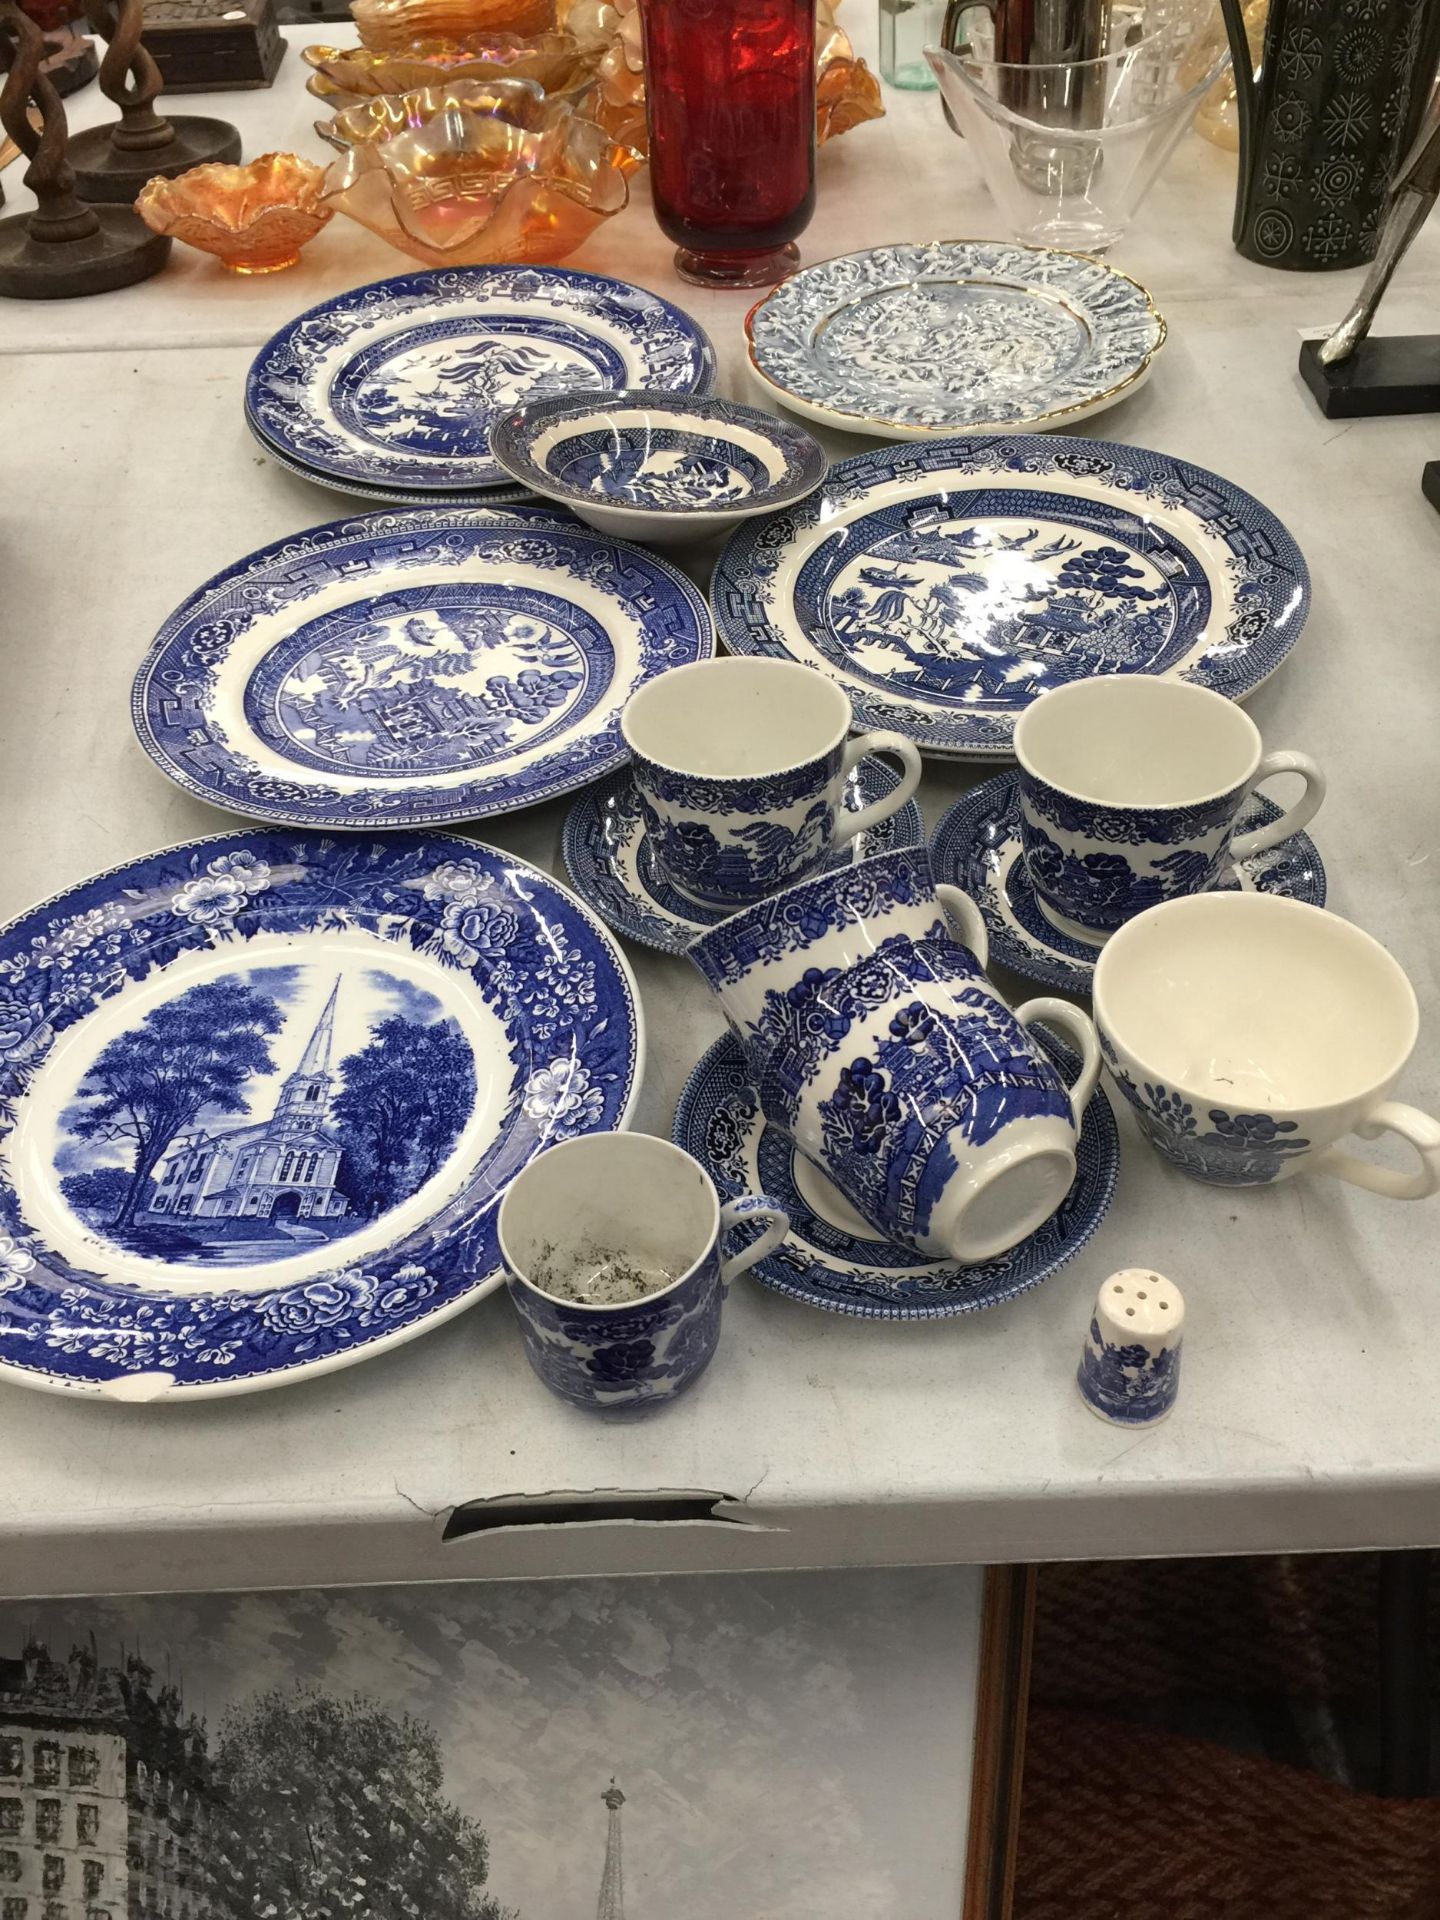 A QUANTITY OF BLUE AND WHITE 'WILLOW' PATTERN PLATES, CUPS AND SAUCERS PLUS A CAPODIMONTE MAJOLICA